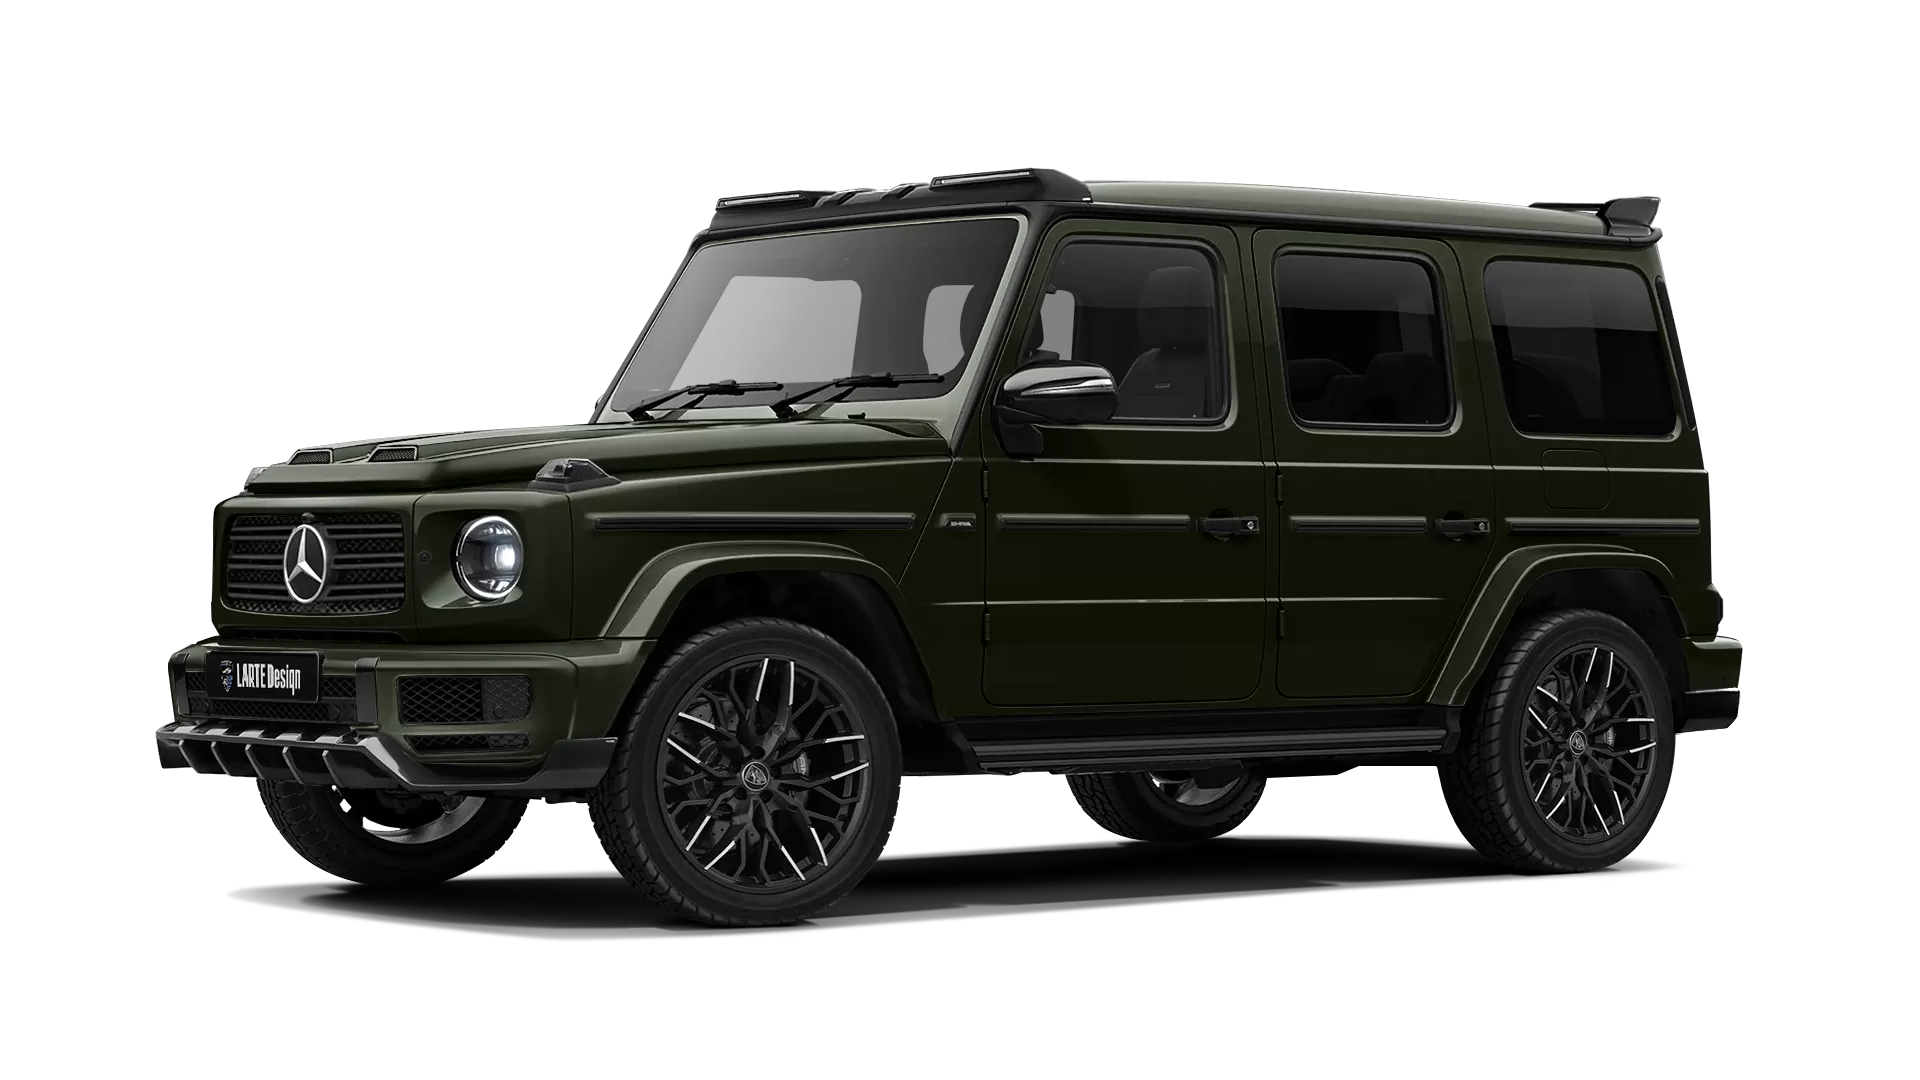 Mercedes G class W463 with painted body kit: front view shown in Dark Olive